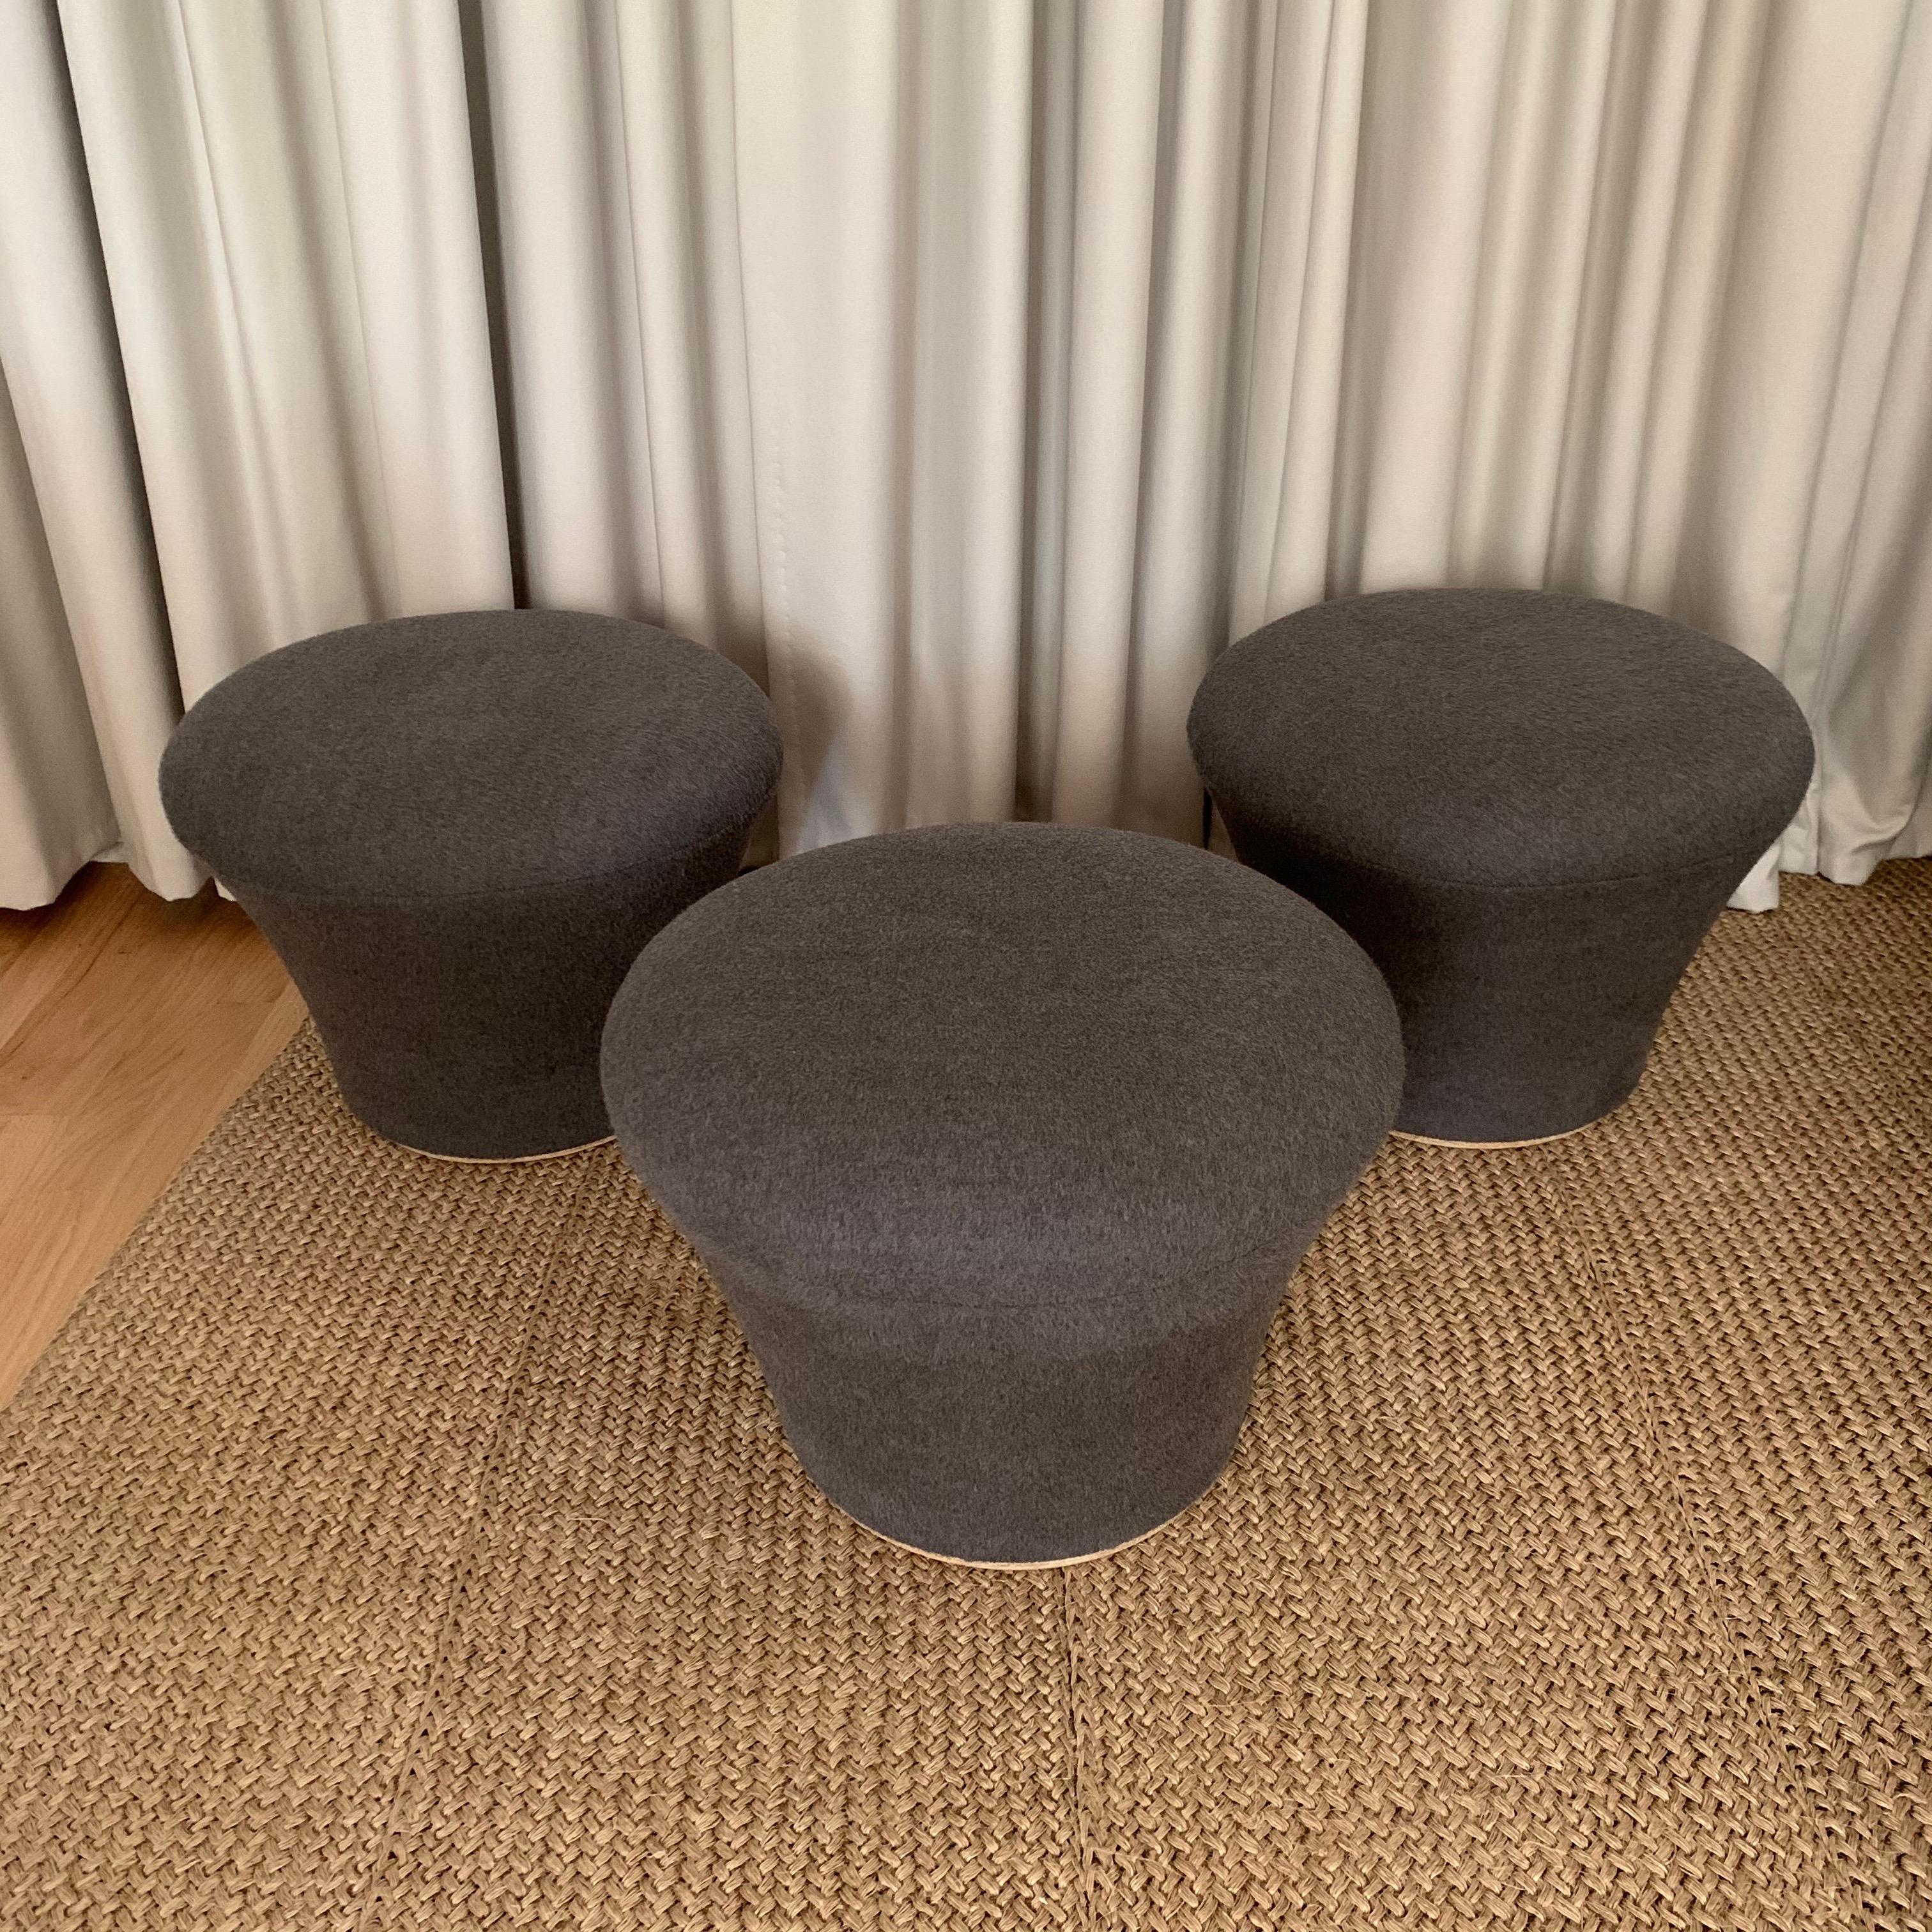 Original mushroom pouf, stool, or ottoman rendered in charcoal gray wool flannel upholstery designed by Pierre Paulin and manufactured by Artifort, Netherlands, 1960s.

Priced individually, 3 pieces available.